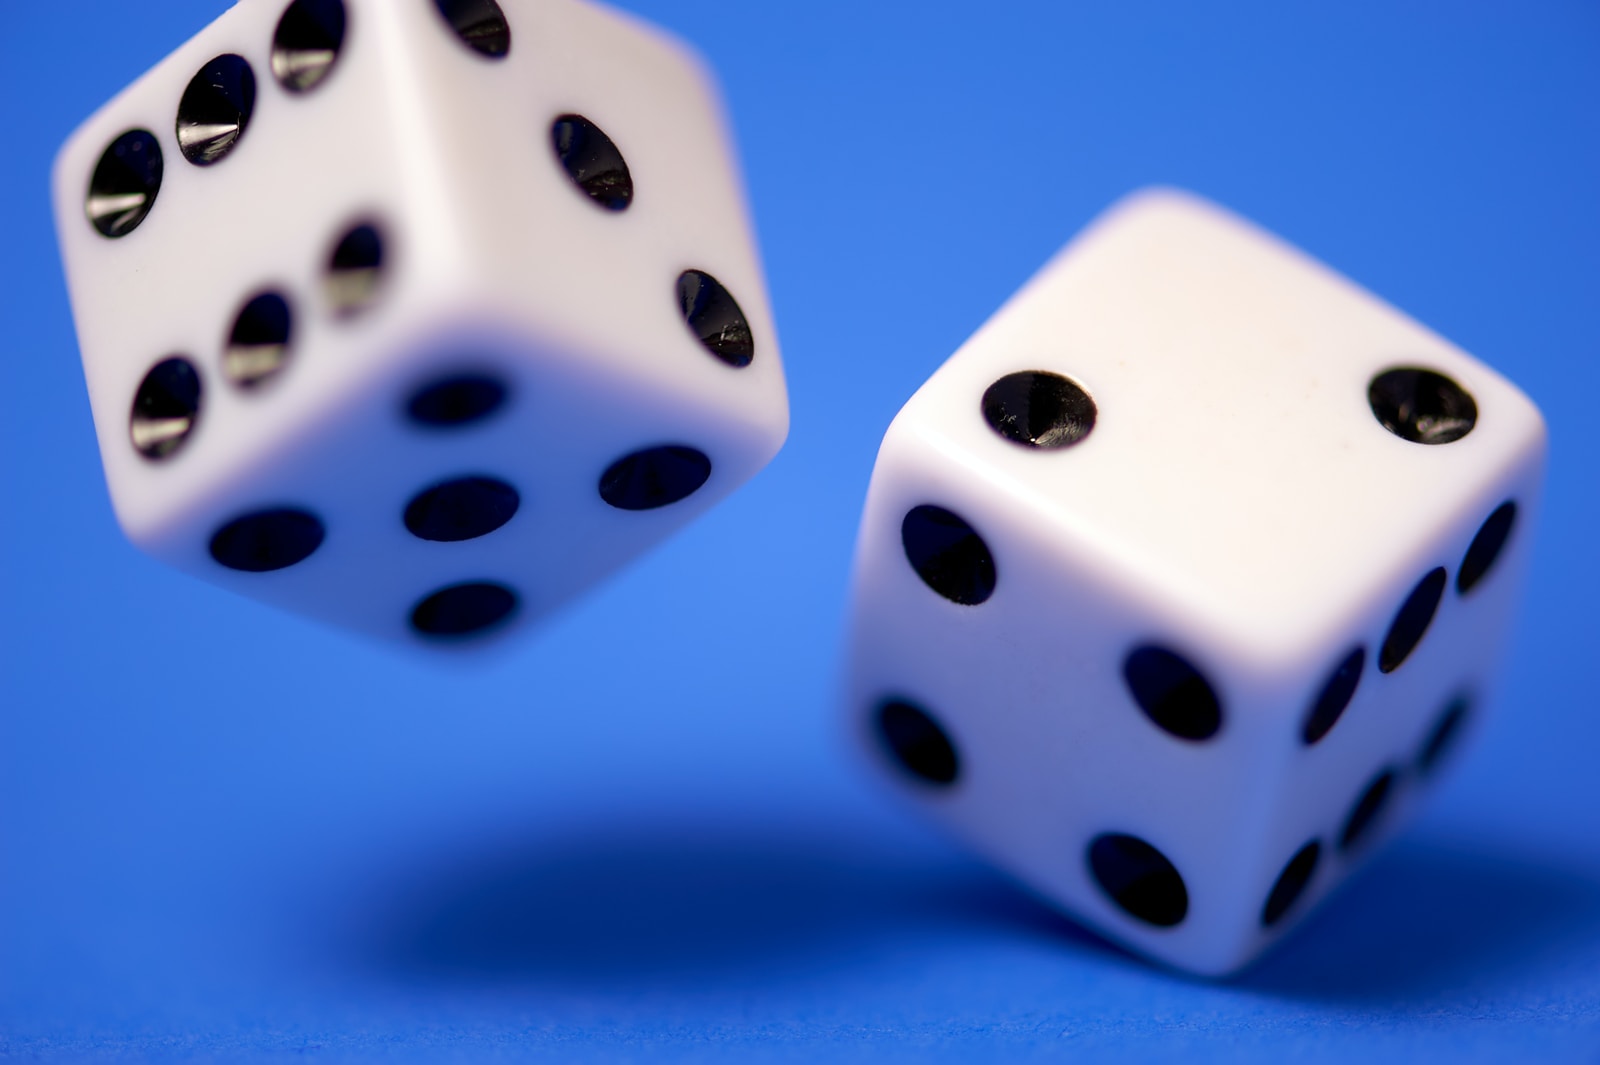 Do you really want to roll the dice when choosing a tax advisor